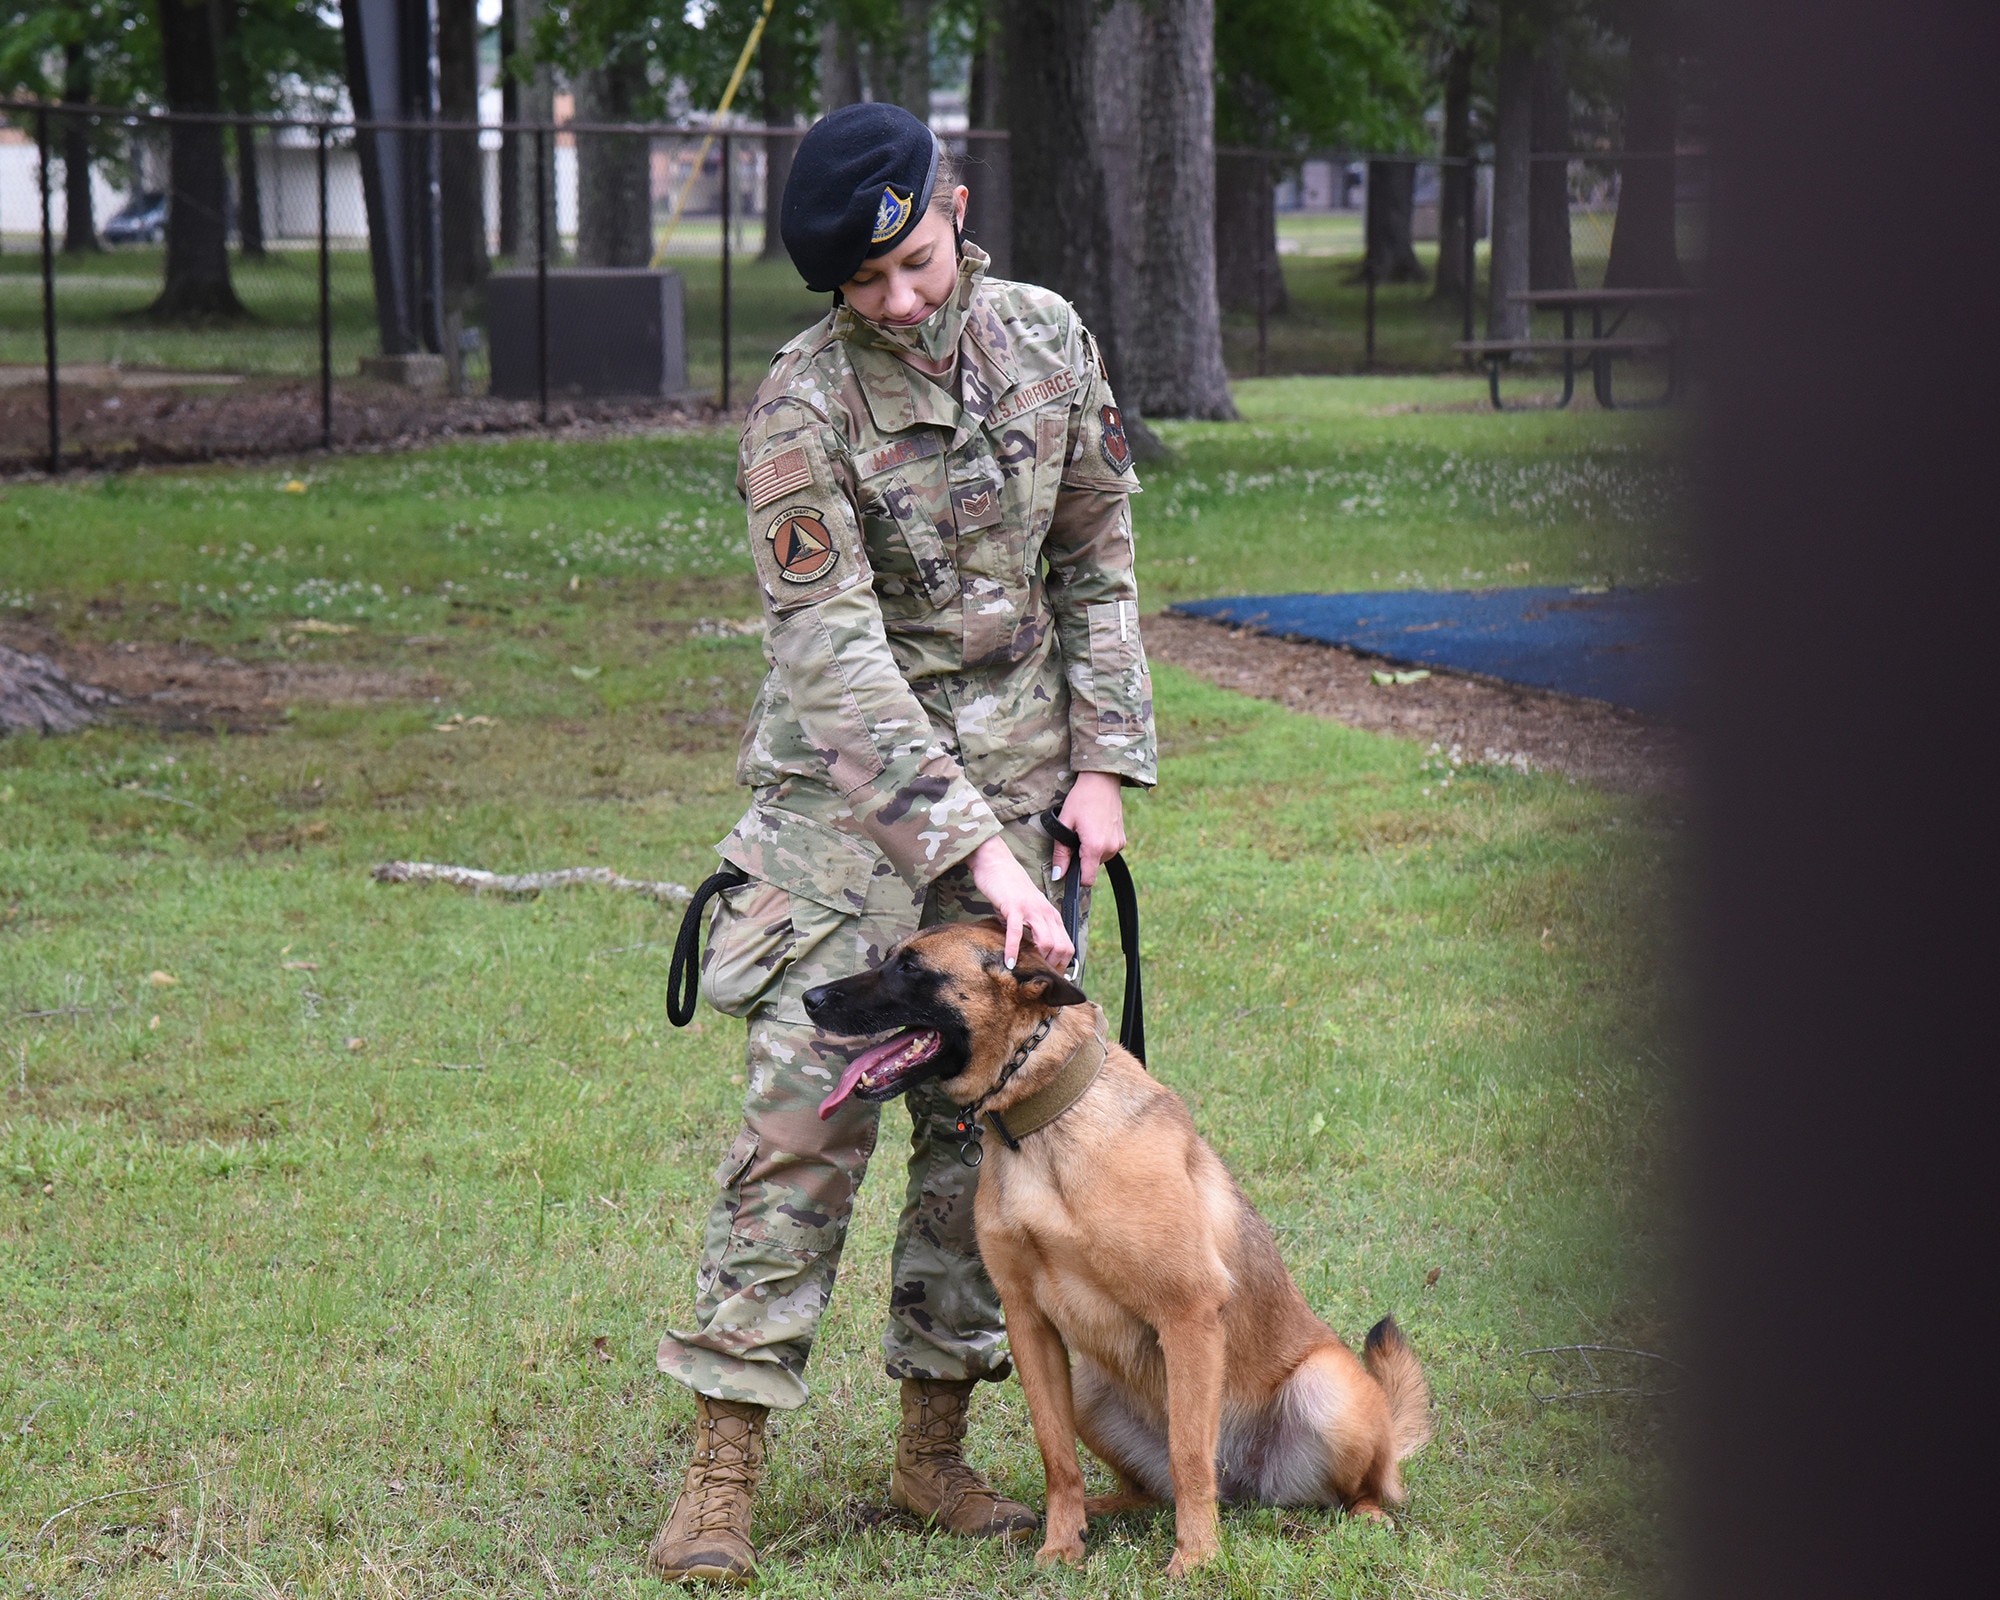 U.S. Air Force Staff Sgt. Amber James, 14th Security Forces Squadron Military Working Dog handler, stands with her partner, Dixi, before a demonstration, May 11, 2021, on Columbus Air Force Base, Mississippi. Military working dogs are deployed around the world to accomplish the Air Force mission by serving in a variety of roles such as tracking, search and rescue, or bomb detection. (U.S. Air Force photo by Elizabeth Owens)